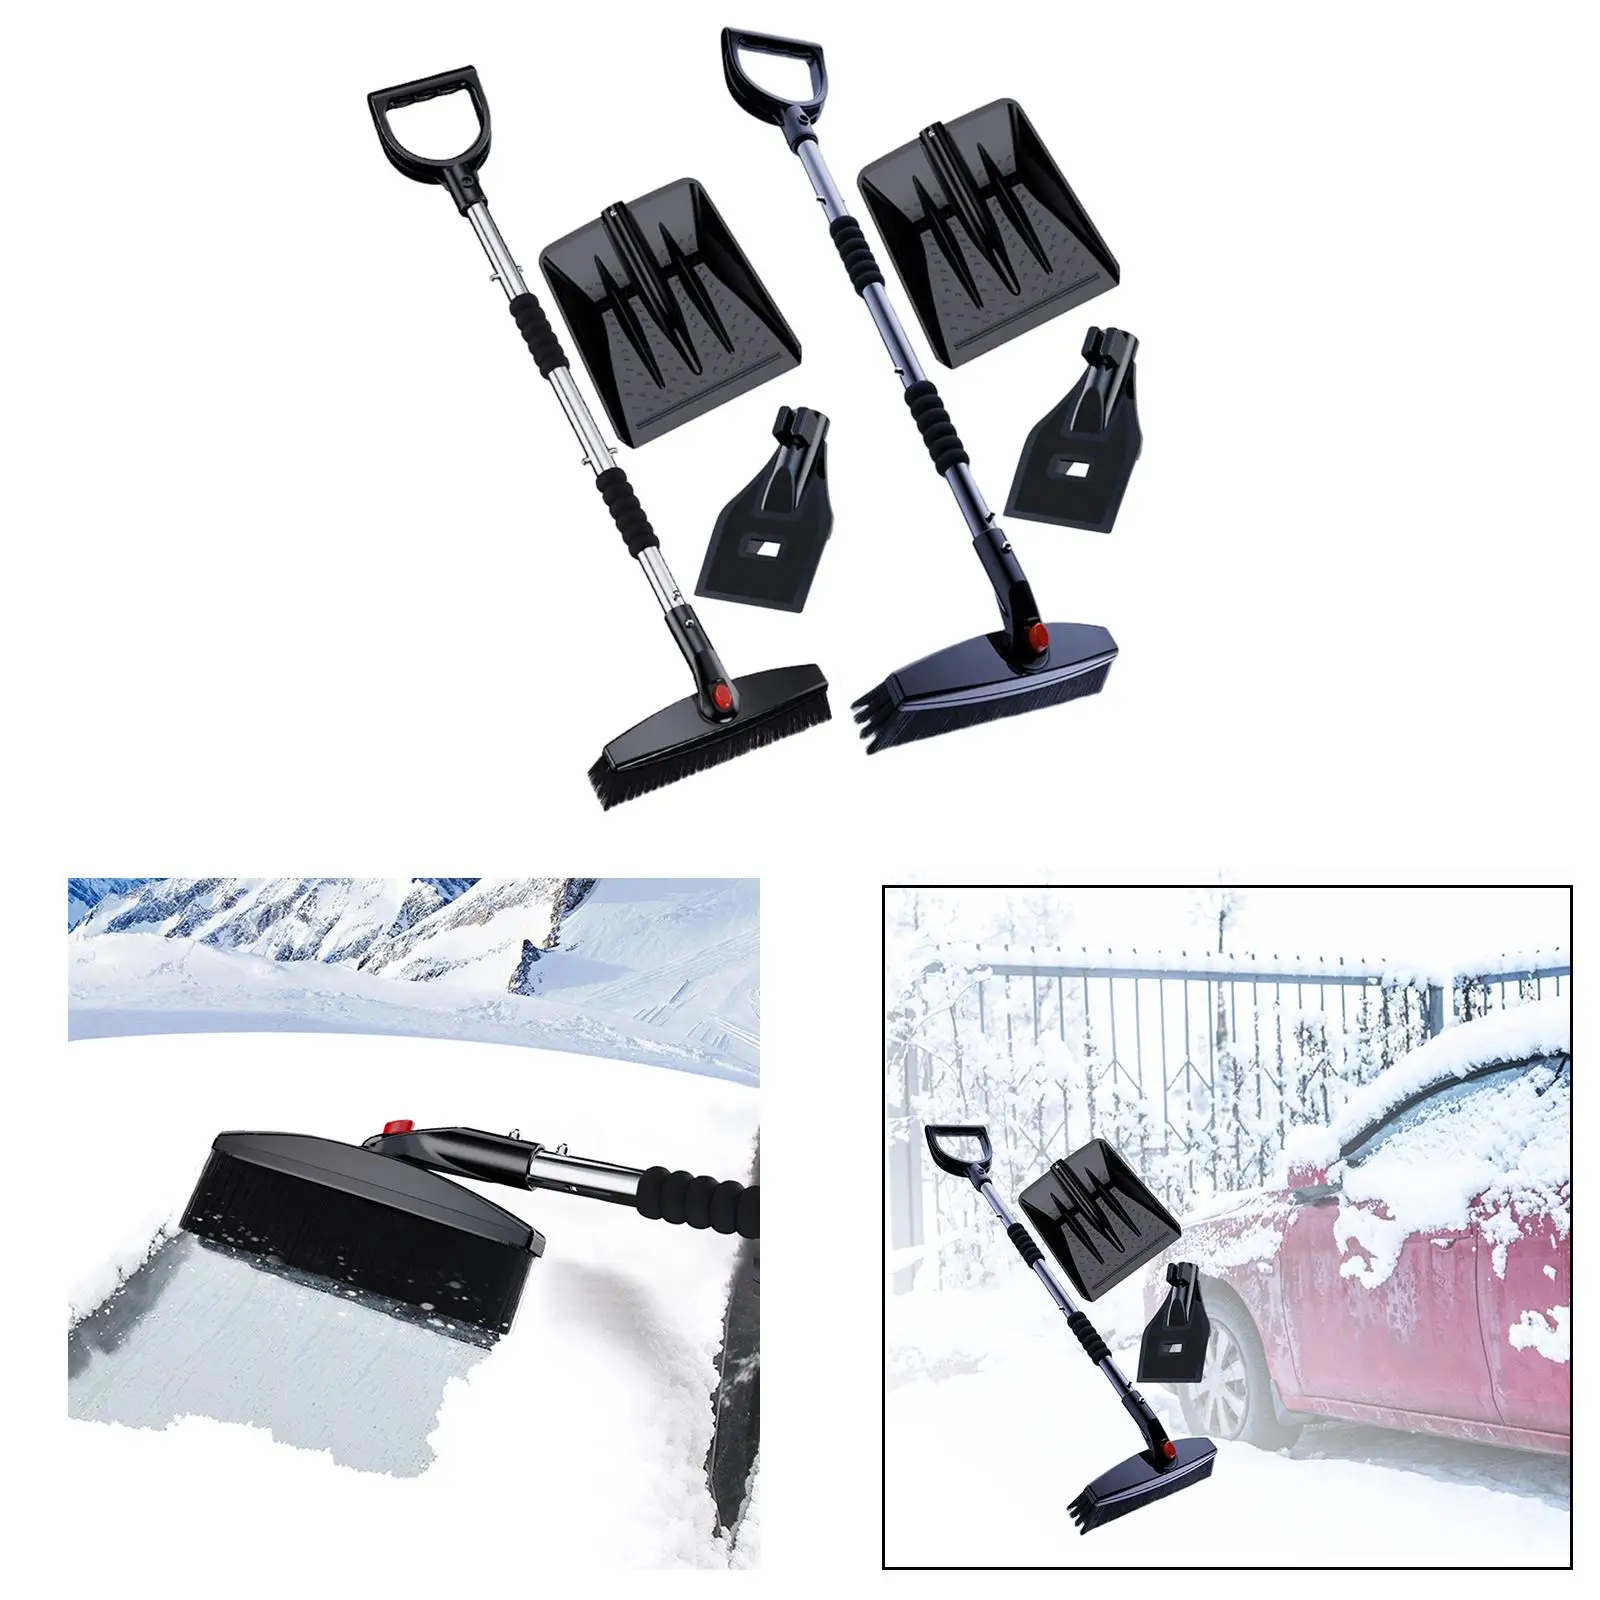 Portable Snow Removal Tool car Window Snow Cleaner Stainless  Handle  Rotatable Head for Truck Car Vehicles Auto